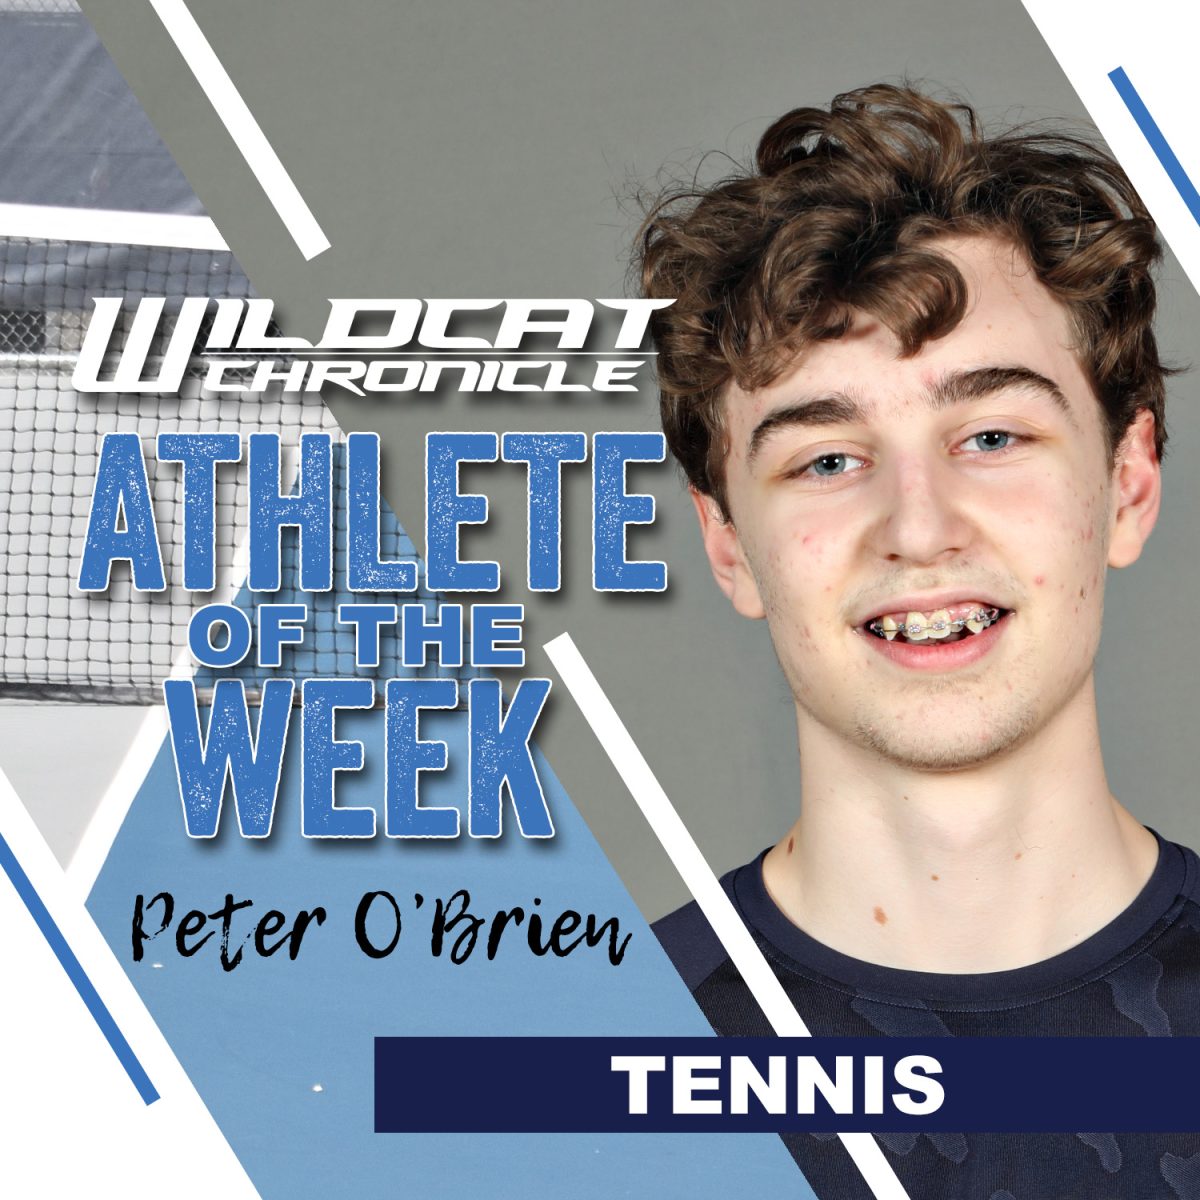 APRIL 7-12: Sophomore Peter OBrien is this weeks pick for Athlete of the Week. According to Coach Madden, “Peter has played a critical role for the Wildcat tennis team this year. He serves as one of our captains and is on our 1st Doubles team! He consistently puts effort into getting better and has been a great teammate for the squad and with his doubles partner as well! Nice work Peter!” (Photo illustration created by Wildcat Chronicle Staff using images by Chris Pena and Lifetouch)